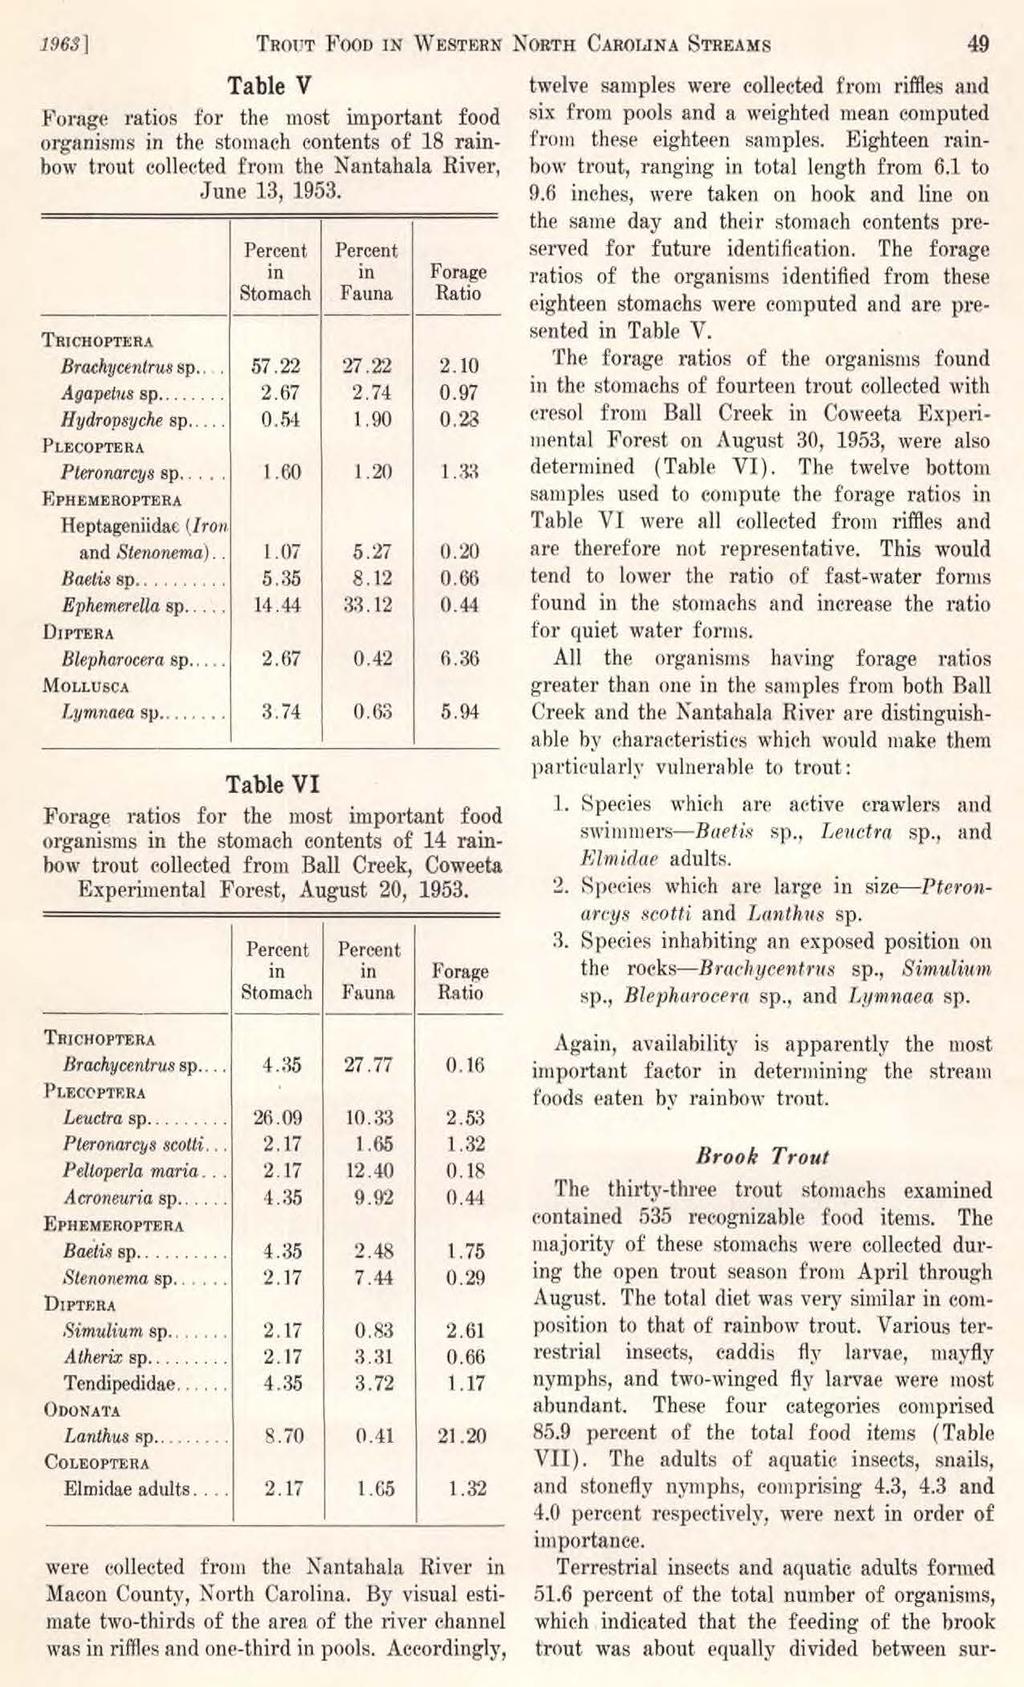 196$] TROUT Fooo IN WESTERN NORTH CAROLINA STnt;AMS 49 Table V Forngc ratios for the most important food orgnnisms in the stomach contents of 18 rainbow trout collected from the Nantahala River, June